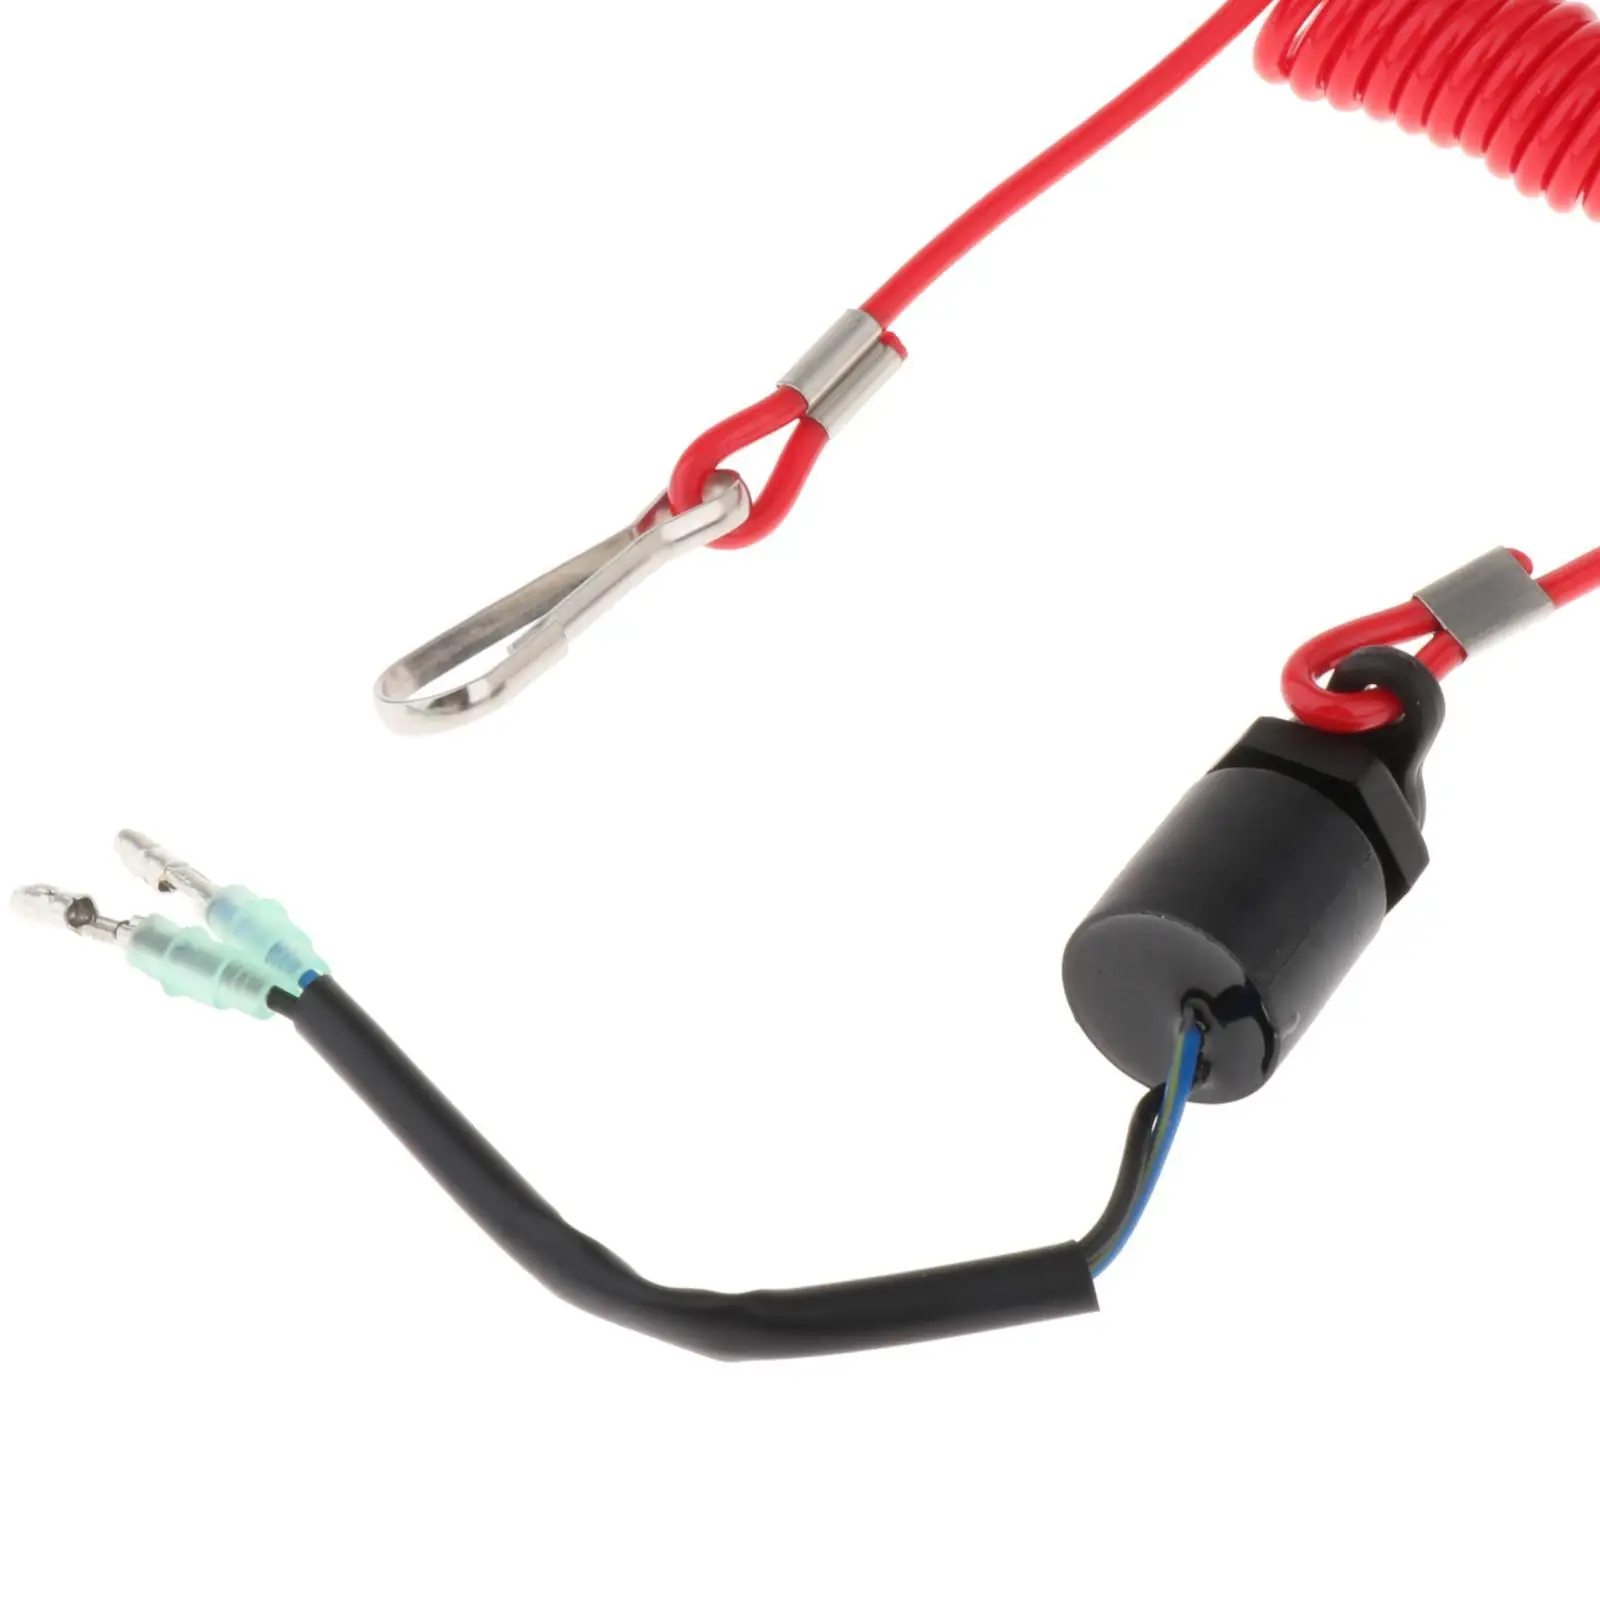 Boat Engine Stop Switch ,37820-92E03 ,Boat Kill Switch with Lanyard for 2-Stroke ,4-Stroke